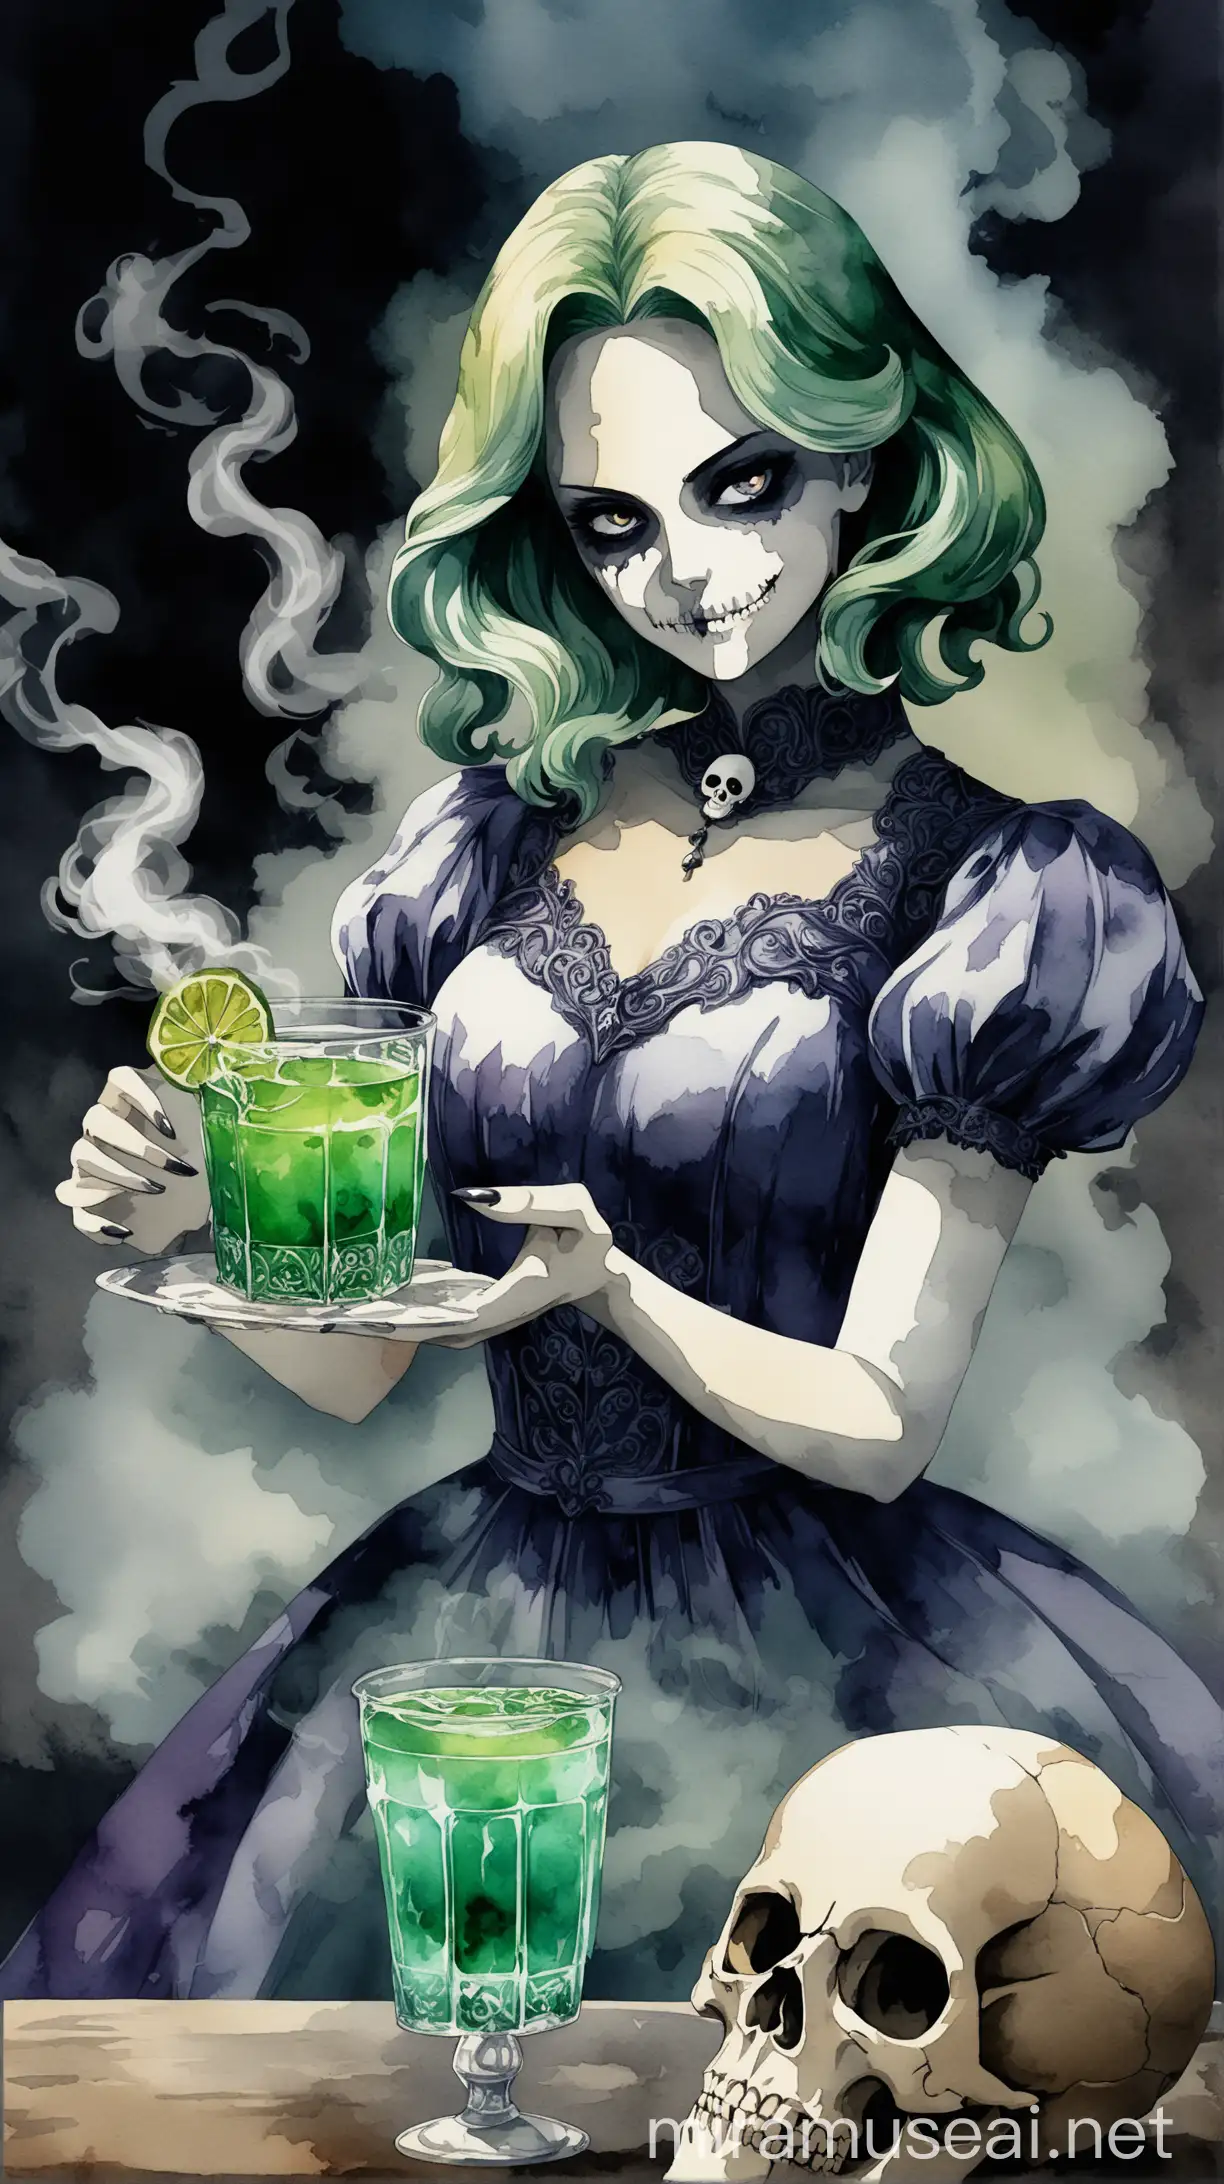 Subject: The central focus of the image is a beautiful and elegant girl holds out a poisoned drink. a skull is formed from smoke above the drink.
Background: dark background painted in watercolor
Style/Coloring: Colors adds depth and richness to the scene. Textures and shadows make the picture more detailed. JoJo reference.